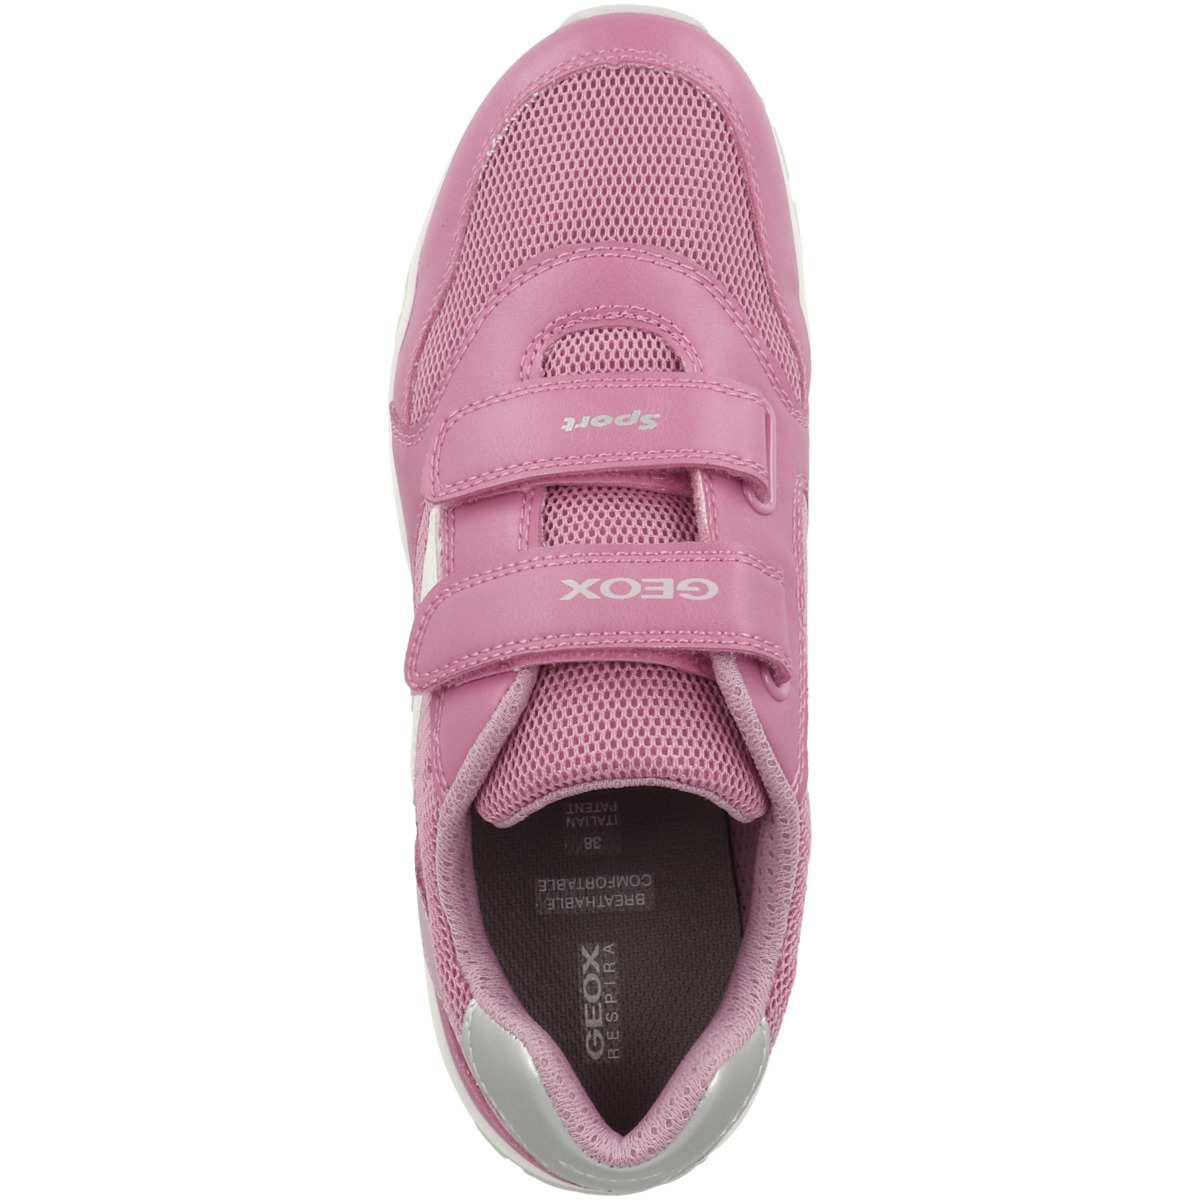 GEOX J Pavel G. A Sneaker low rosa